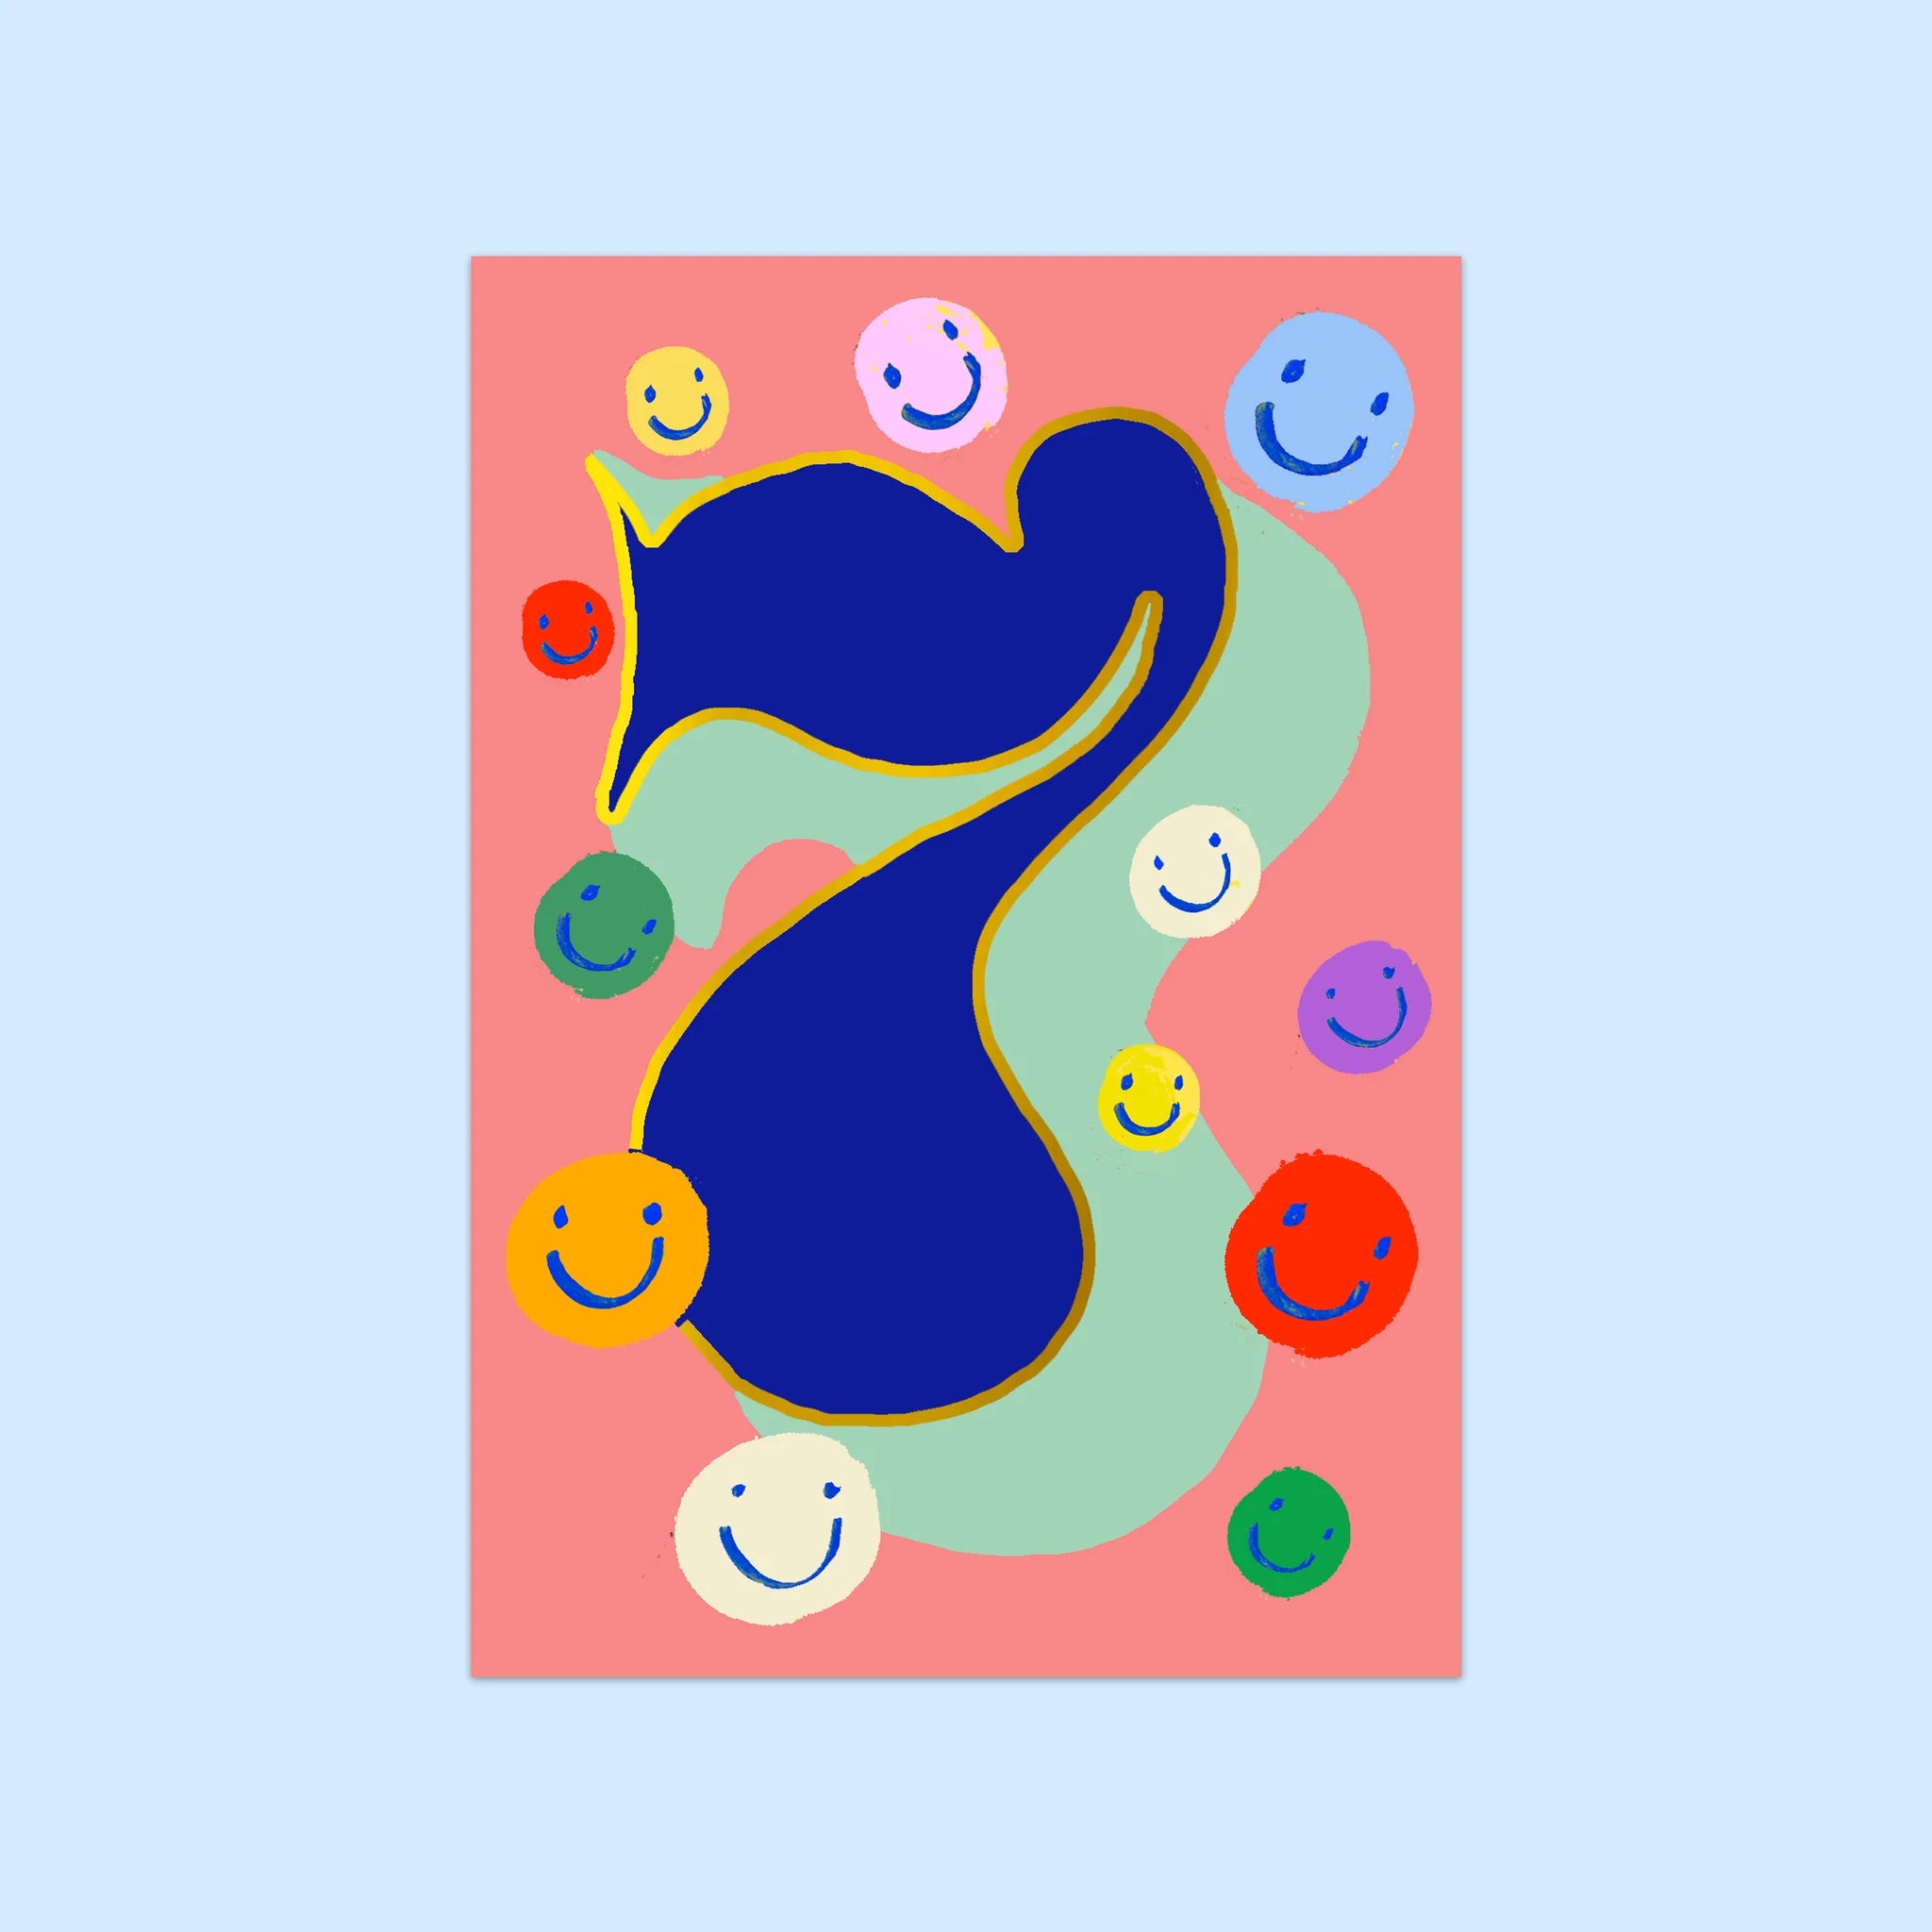 AGE 7 (SMILEY FACES) | CARD BY ELEANOR BOWMER